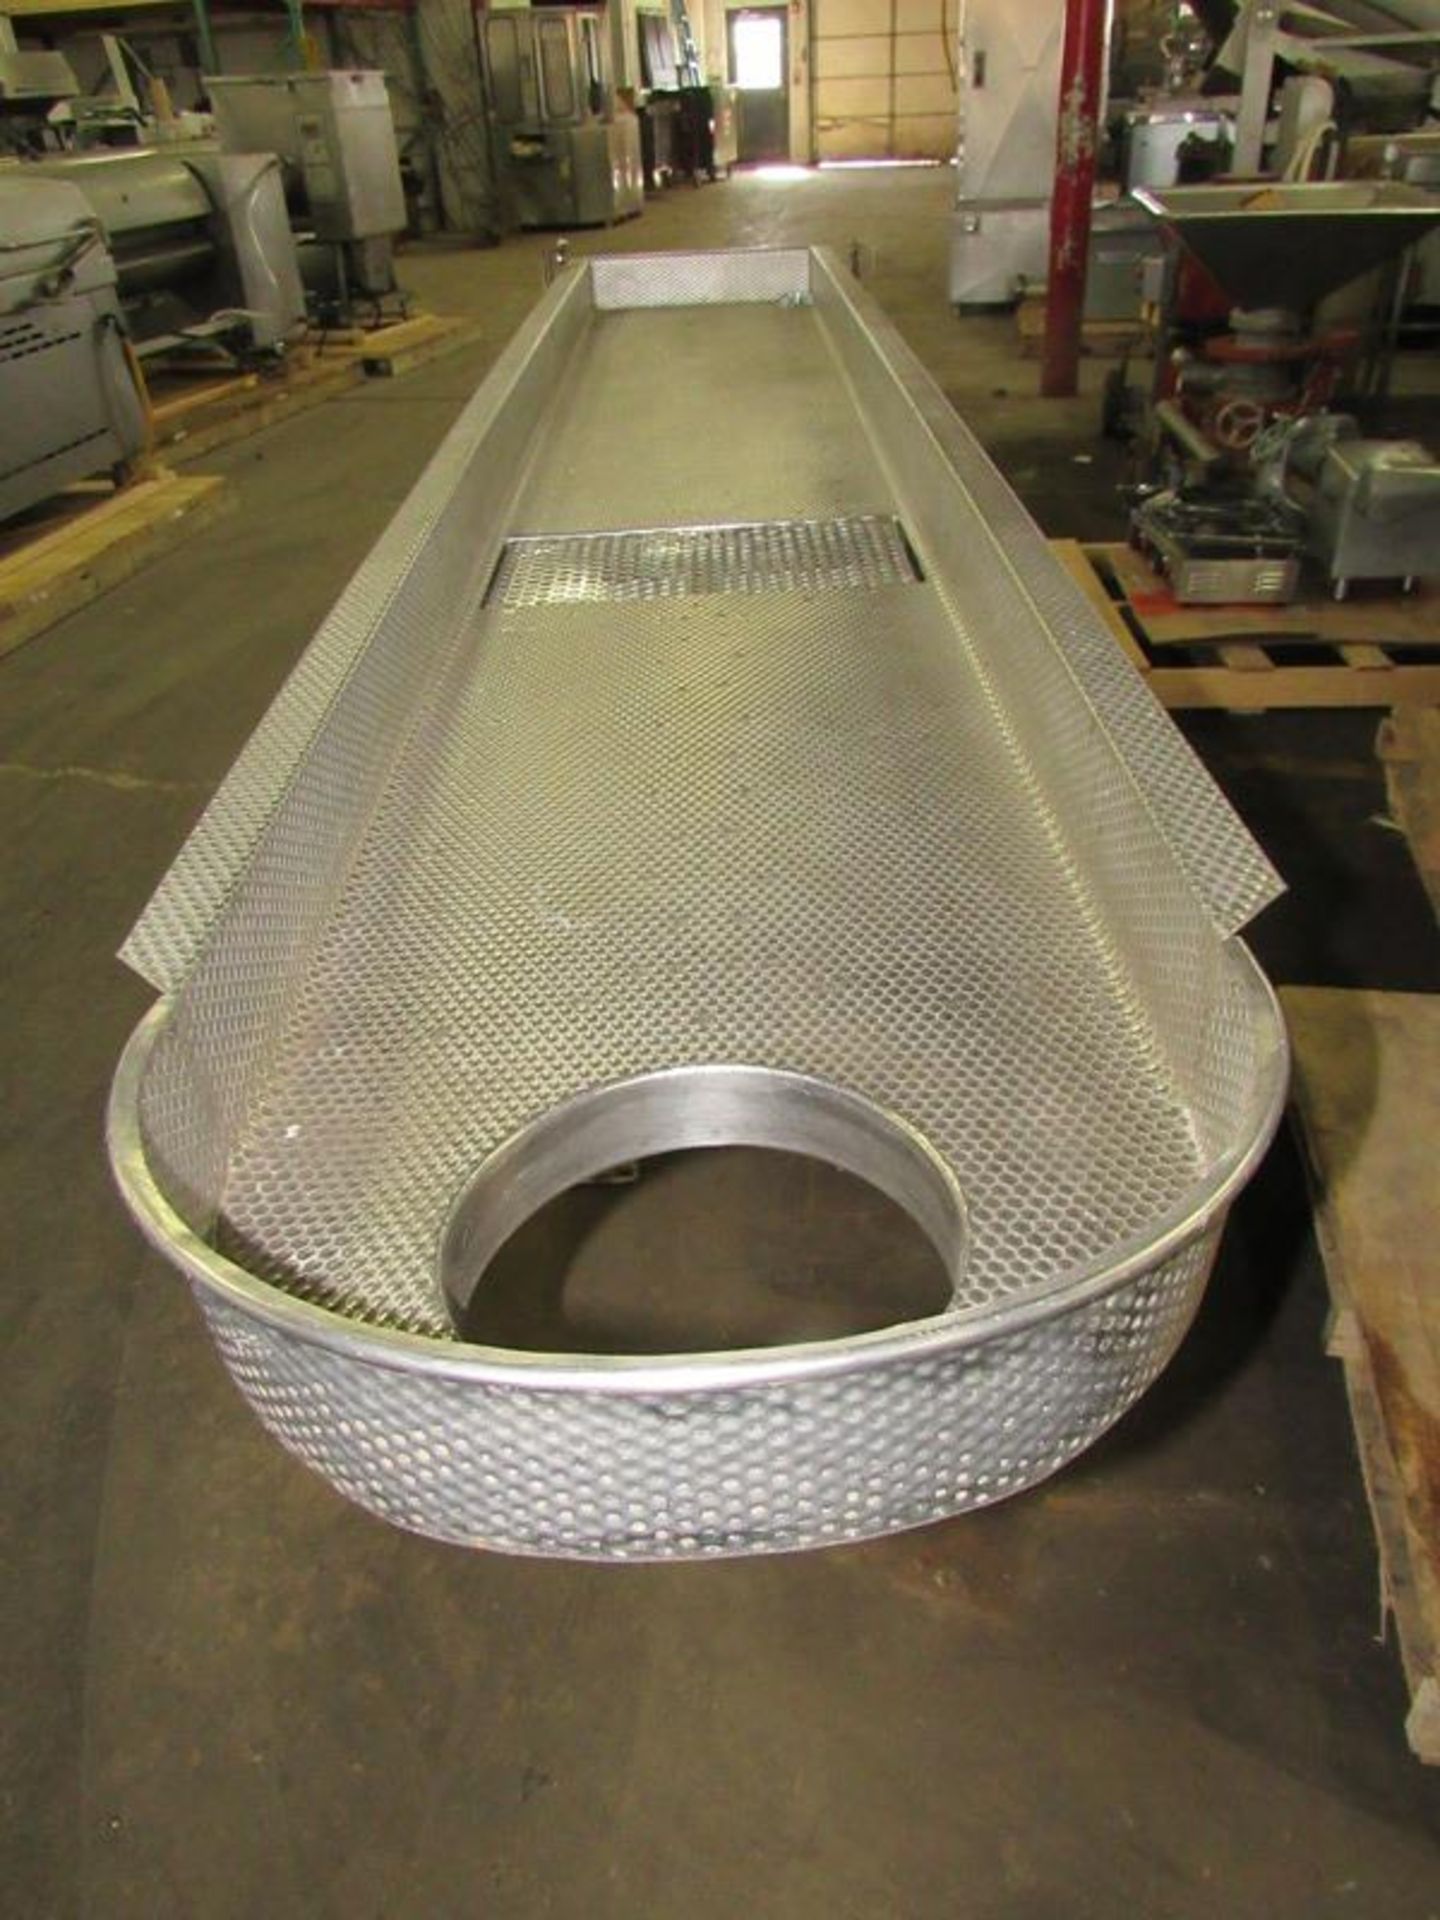 Smalley Mdl. EMC2t Vibratory Conveyor, dimpled stainless steel tray, 18" W X 115" L X 4" D, 9" - Image 4 of 6